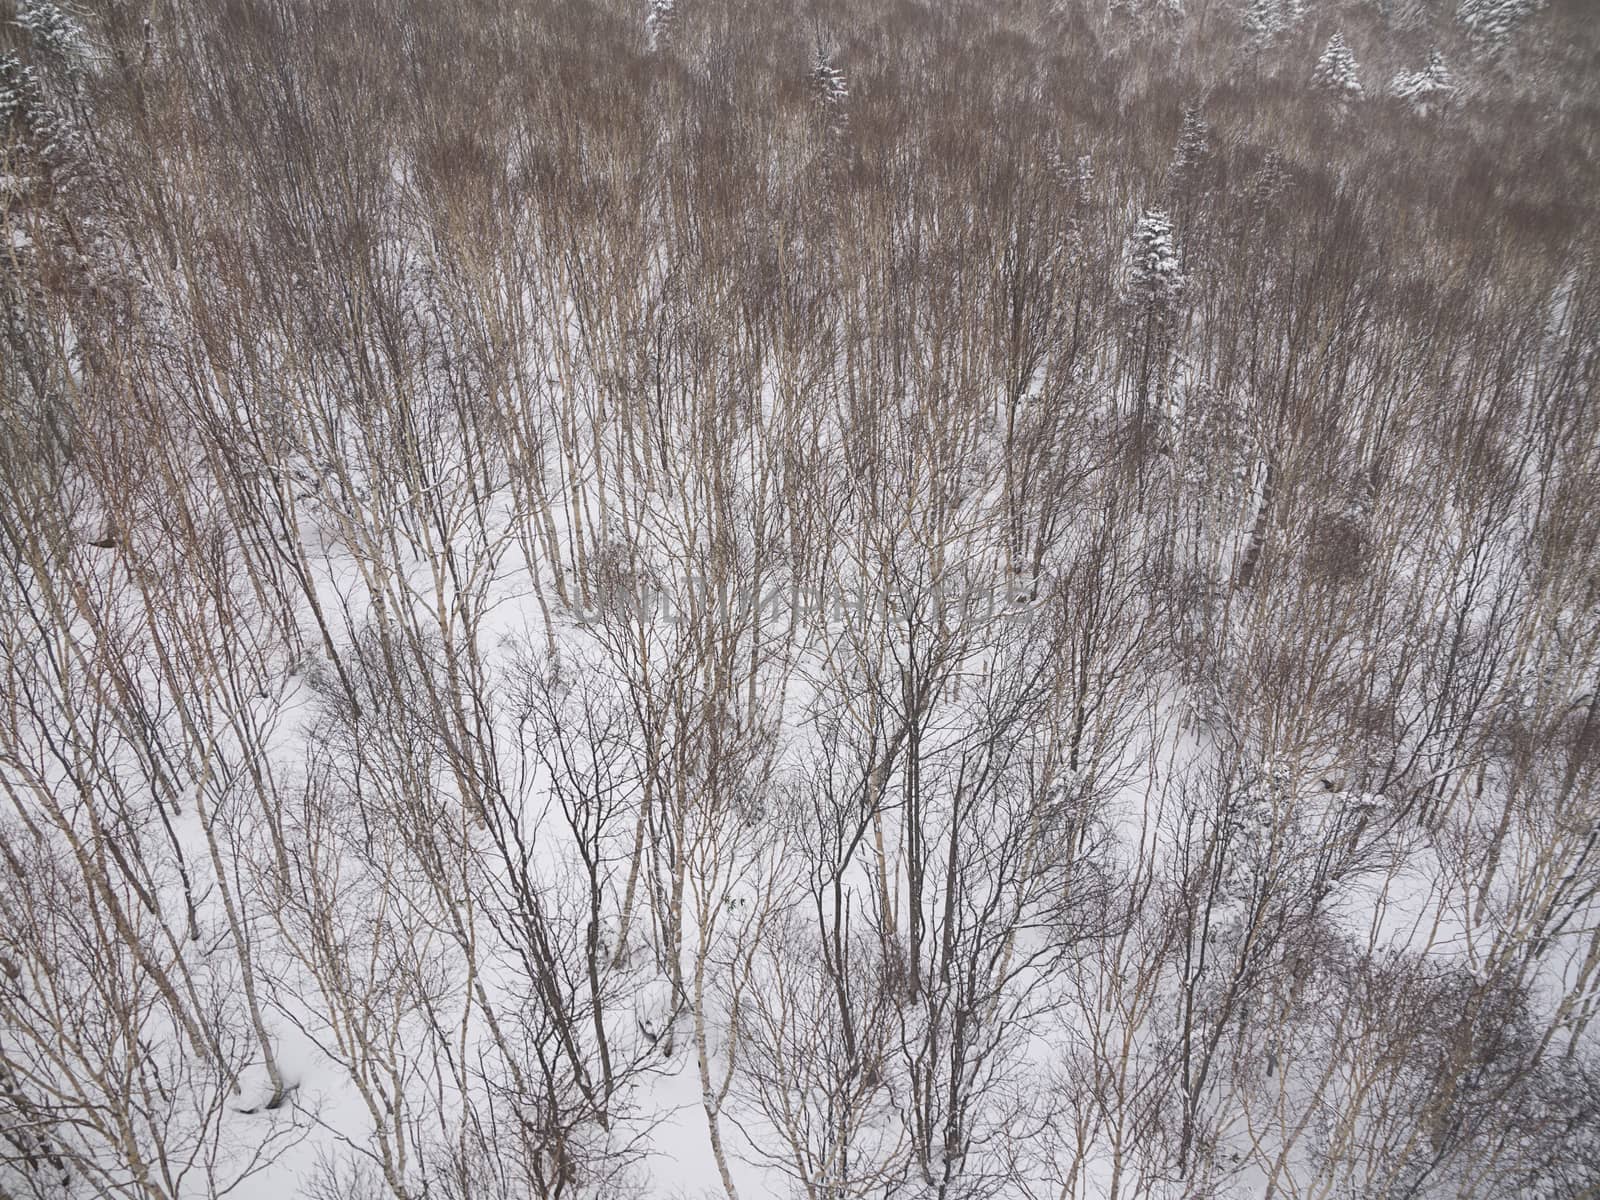 Aerial view of Leafless trees with hoarfrost in winter.